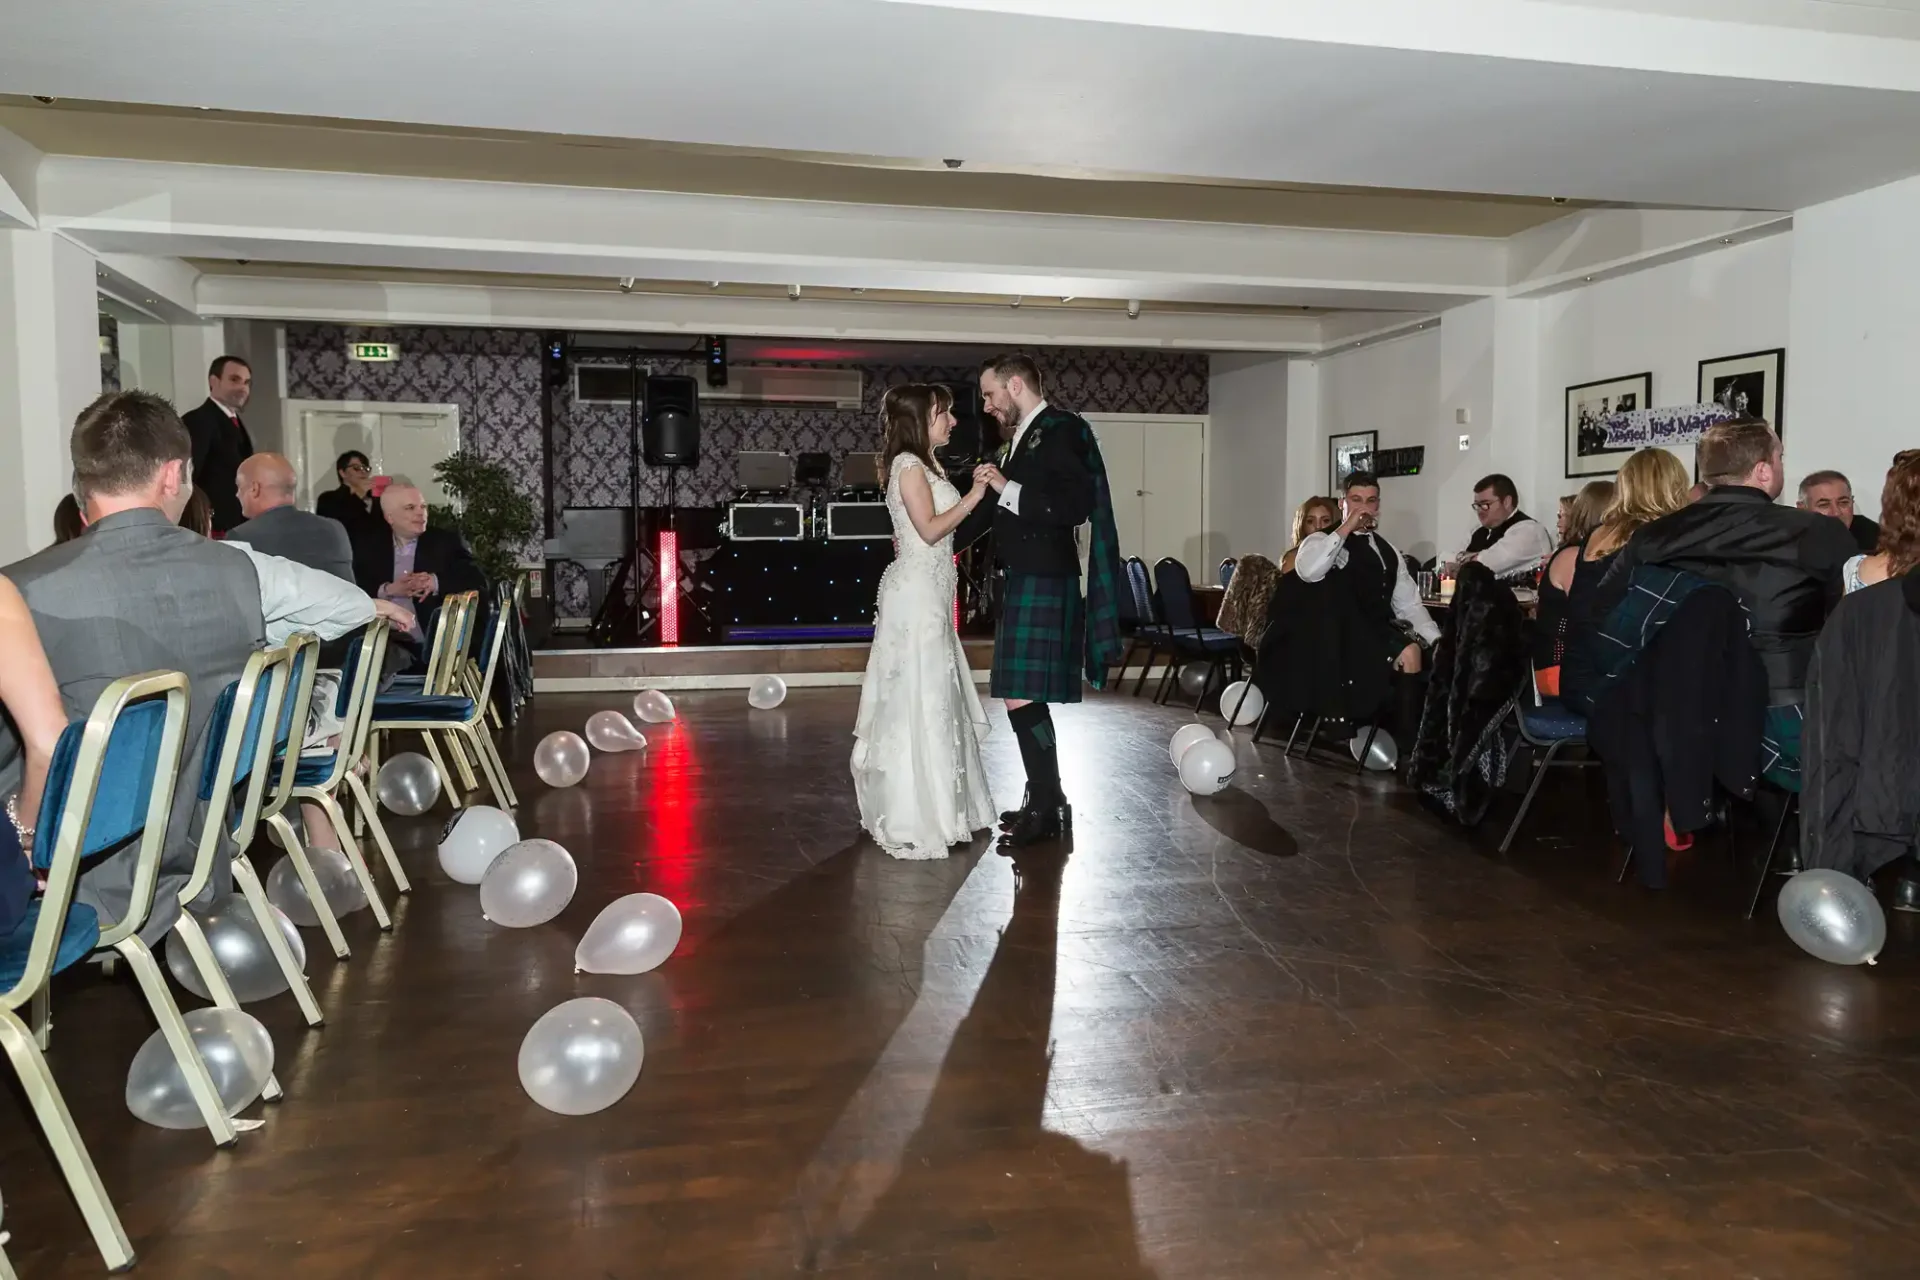 A bride and groom share their first dance in a hall decorated with balloons, surrounded by seated guests watching them.